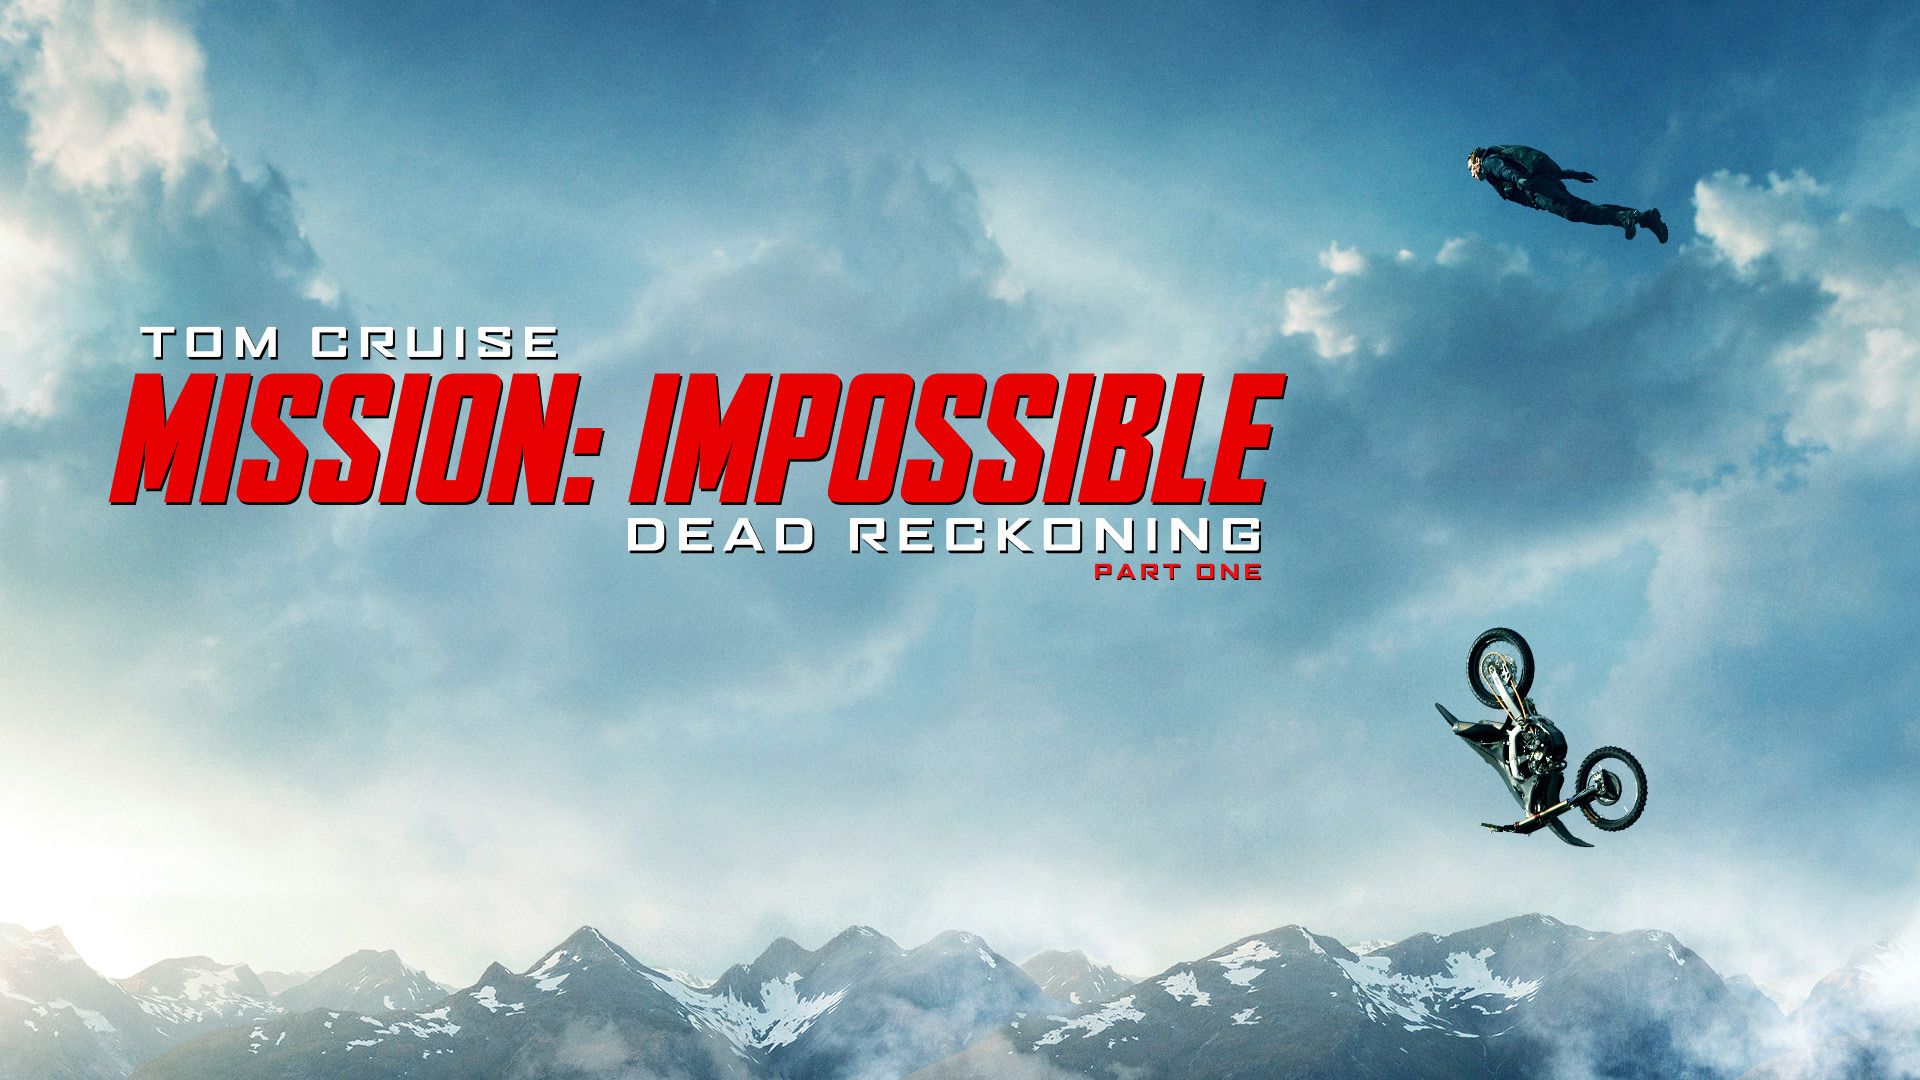 Where To Watch Mission Impossible Dead Reckoning?